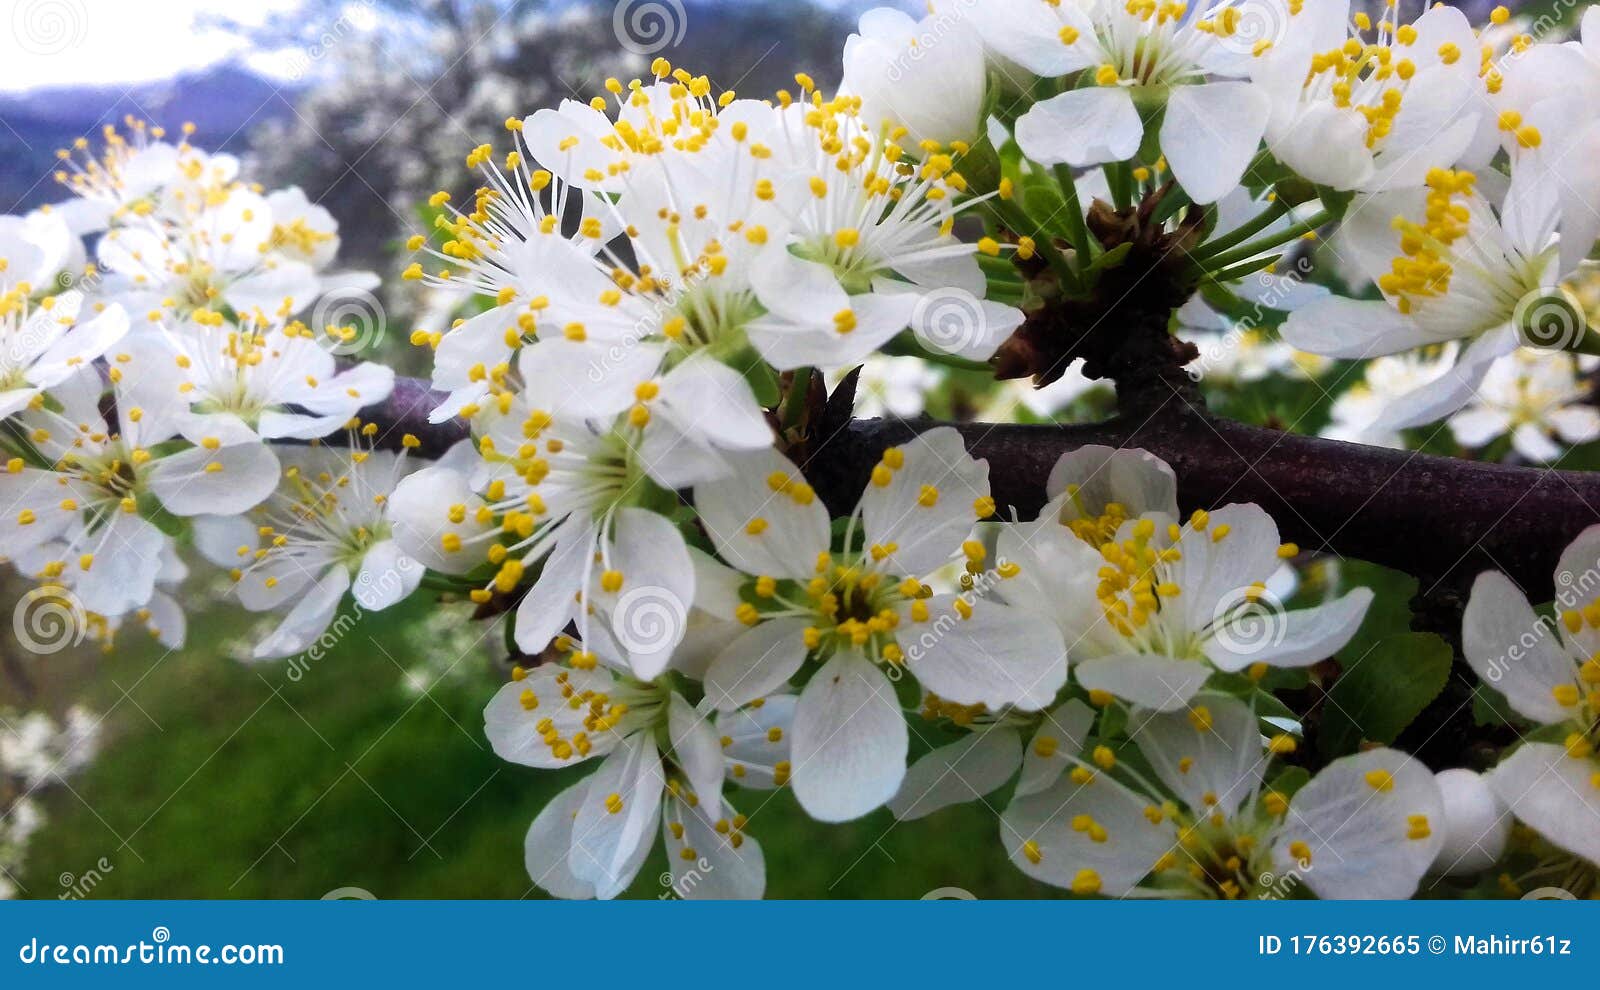 Plum Flowers In Spring White Plum Blossoms Stock Image Image Of